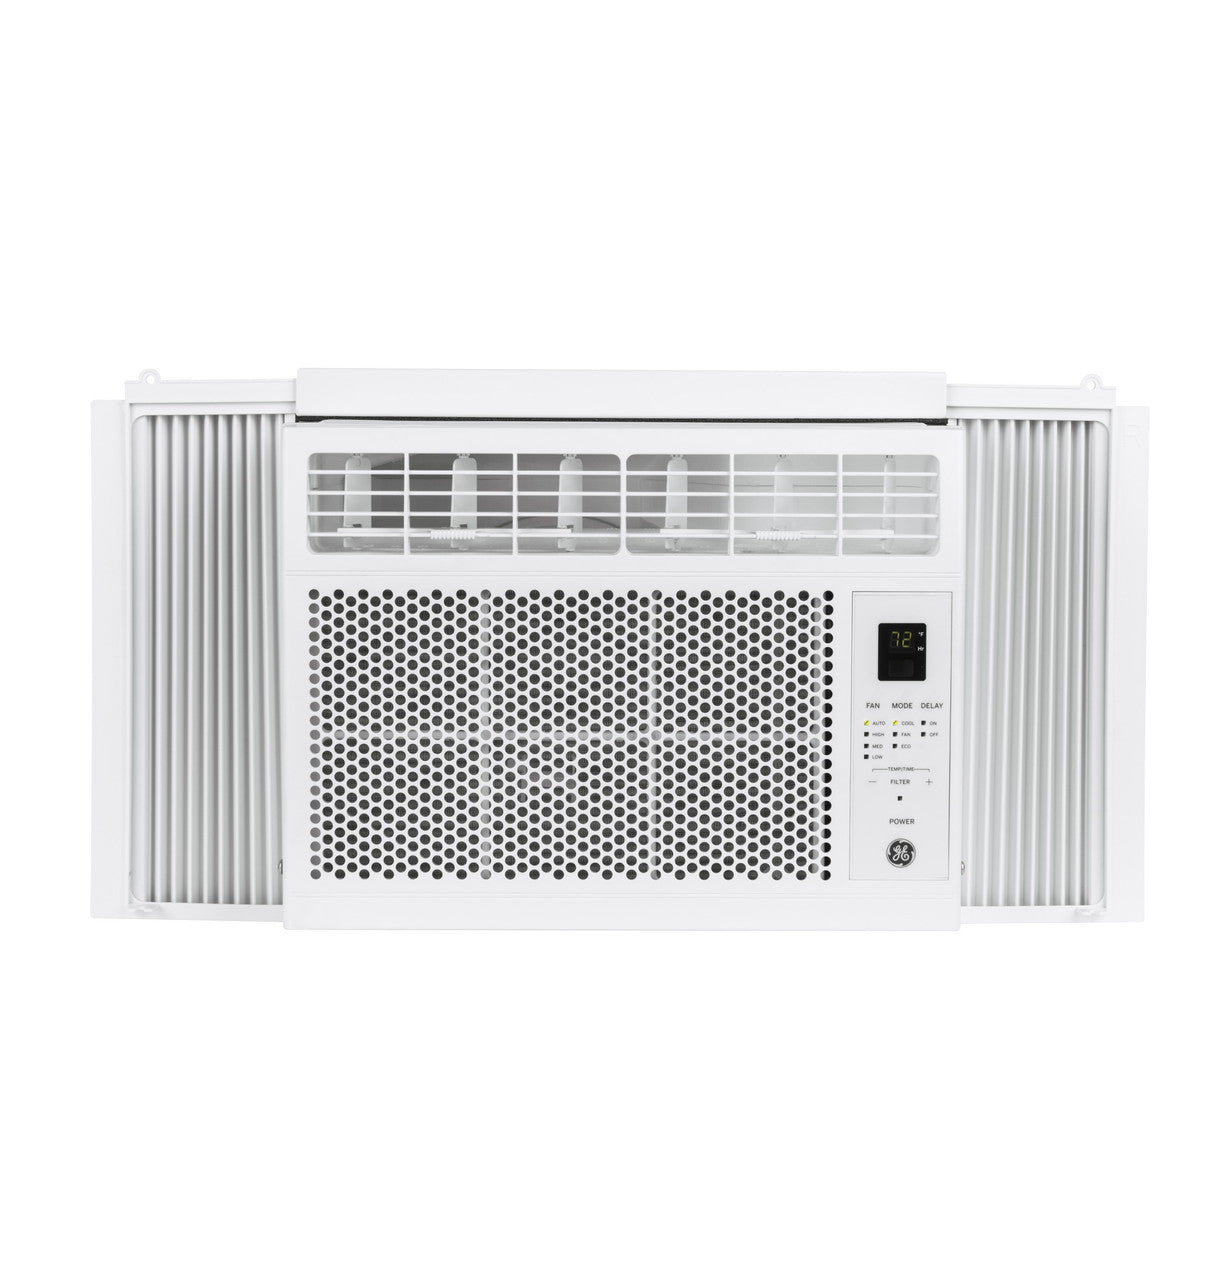 GE 6,000 BTU Electronic Window Air Conditioner for Small Rooms up to 250 sq ft. (Refurbished)